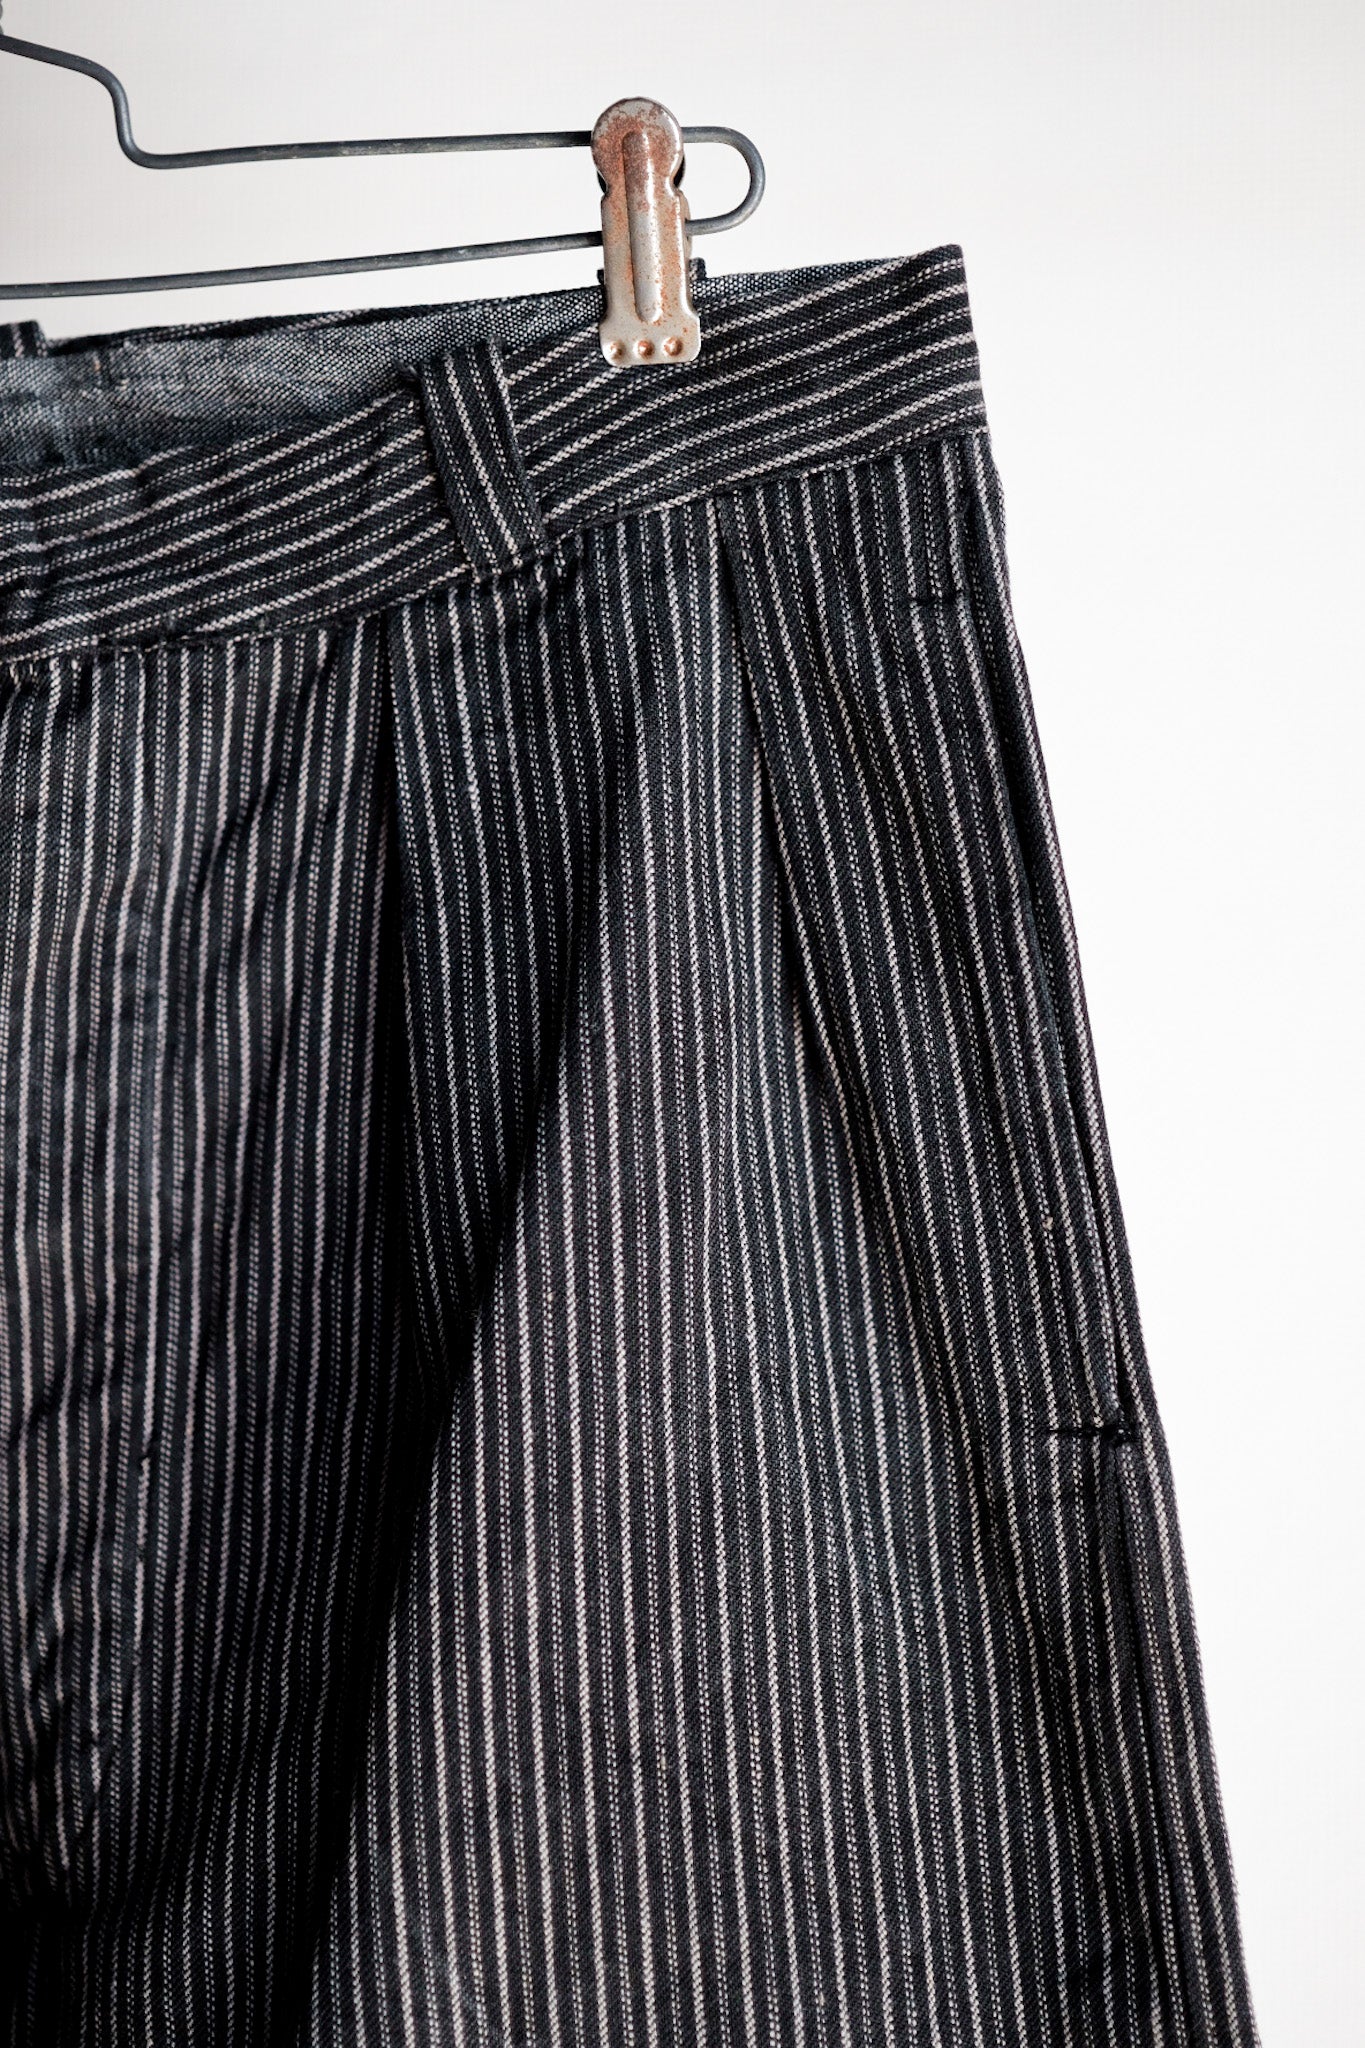 【~40's】French Vintage Cotton Striped Work Pants